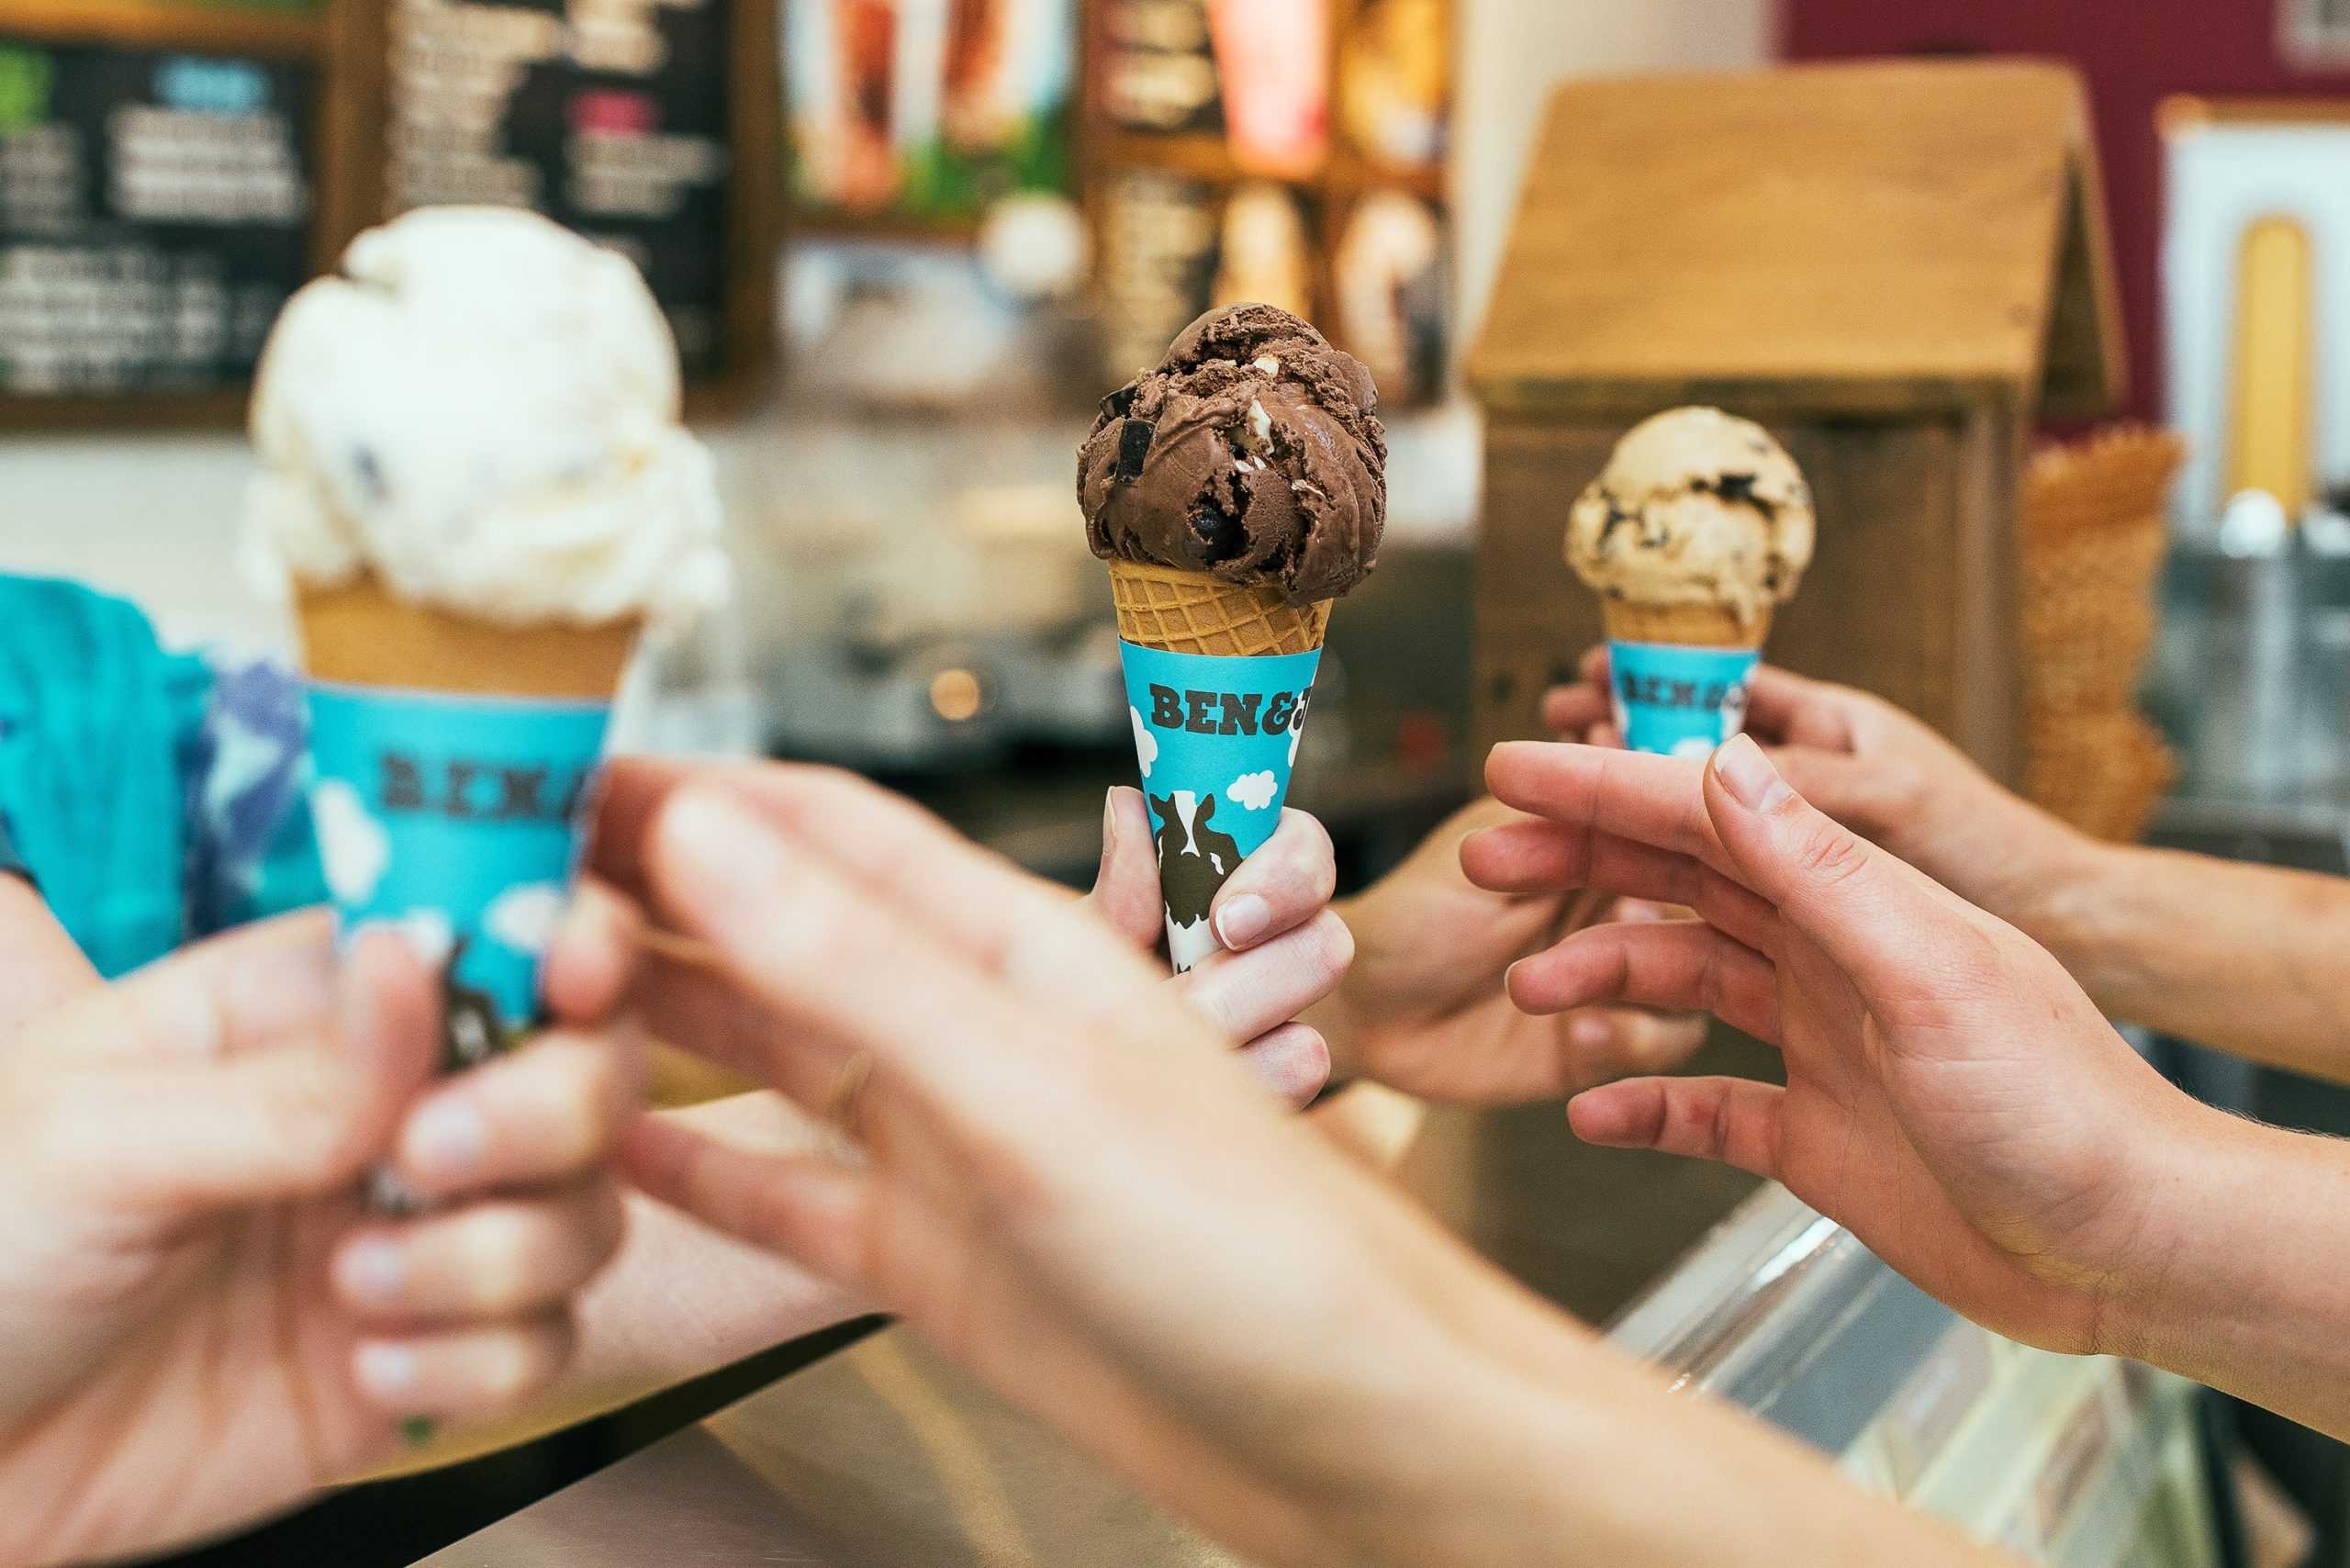 Ben & Jerry's Scoop Shops Have These Dairy-Free and Vegan Menu Items + Tips for Free Cone Day!